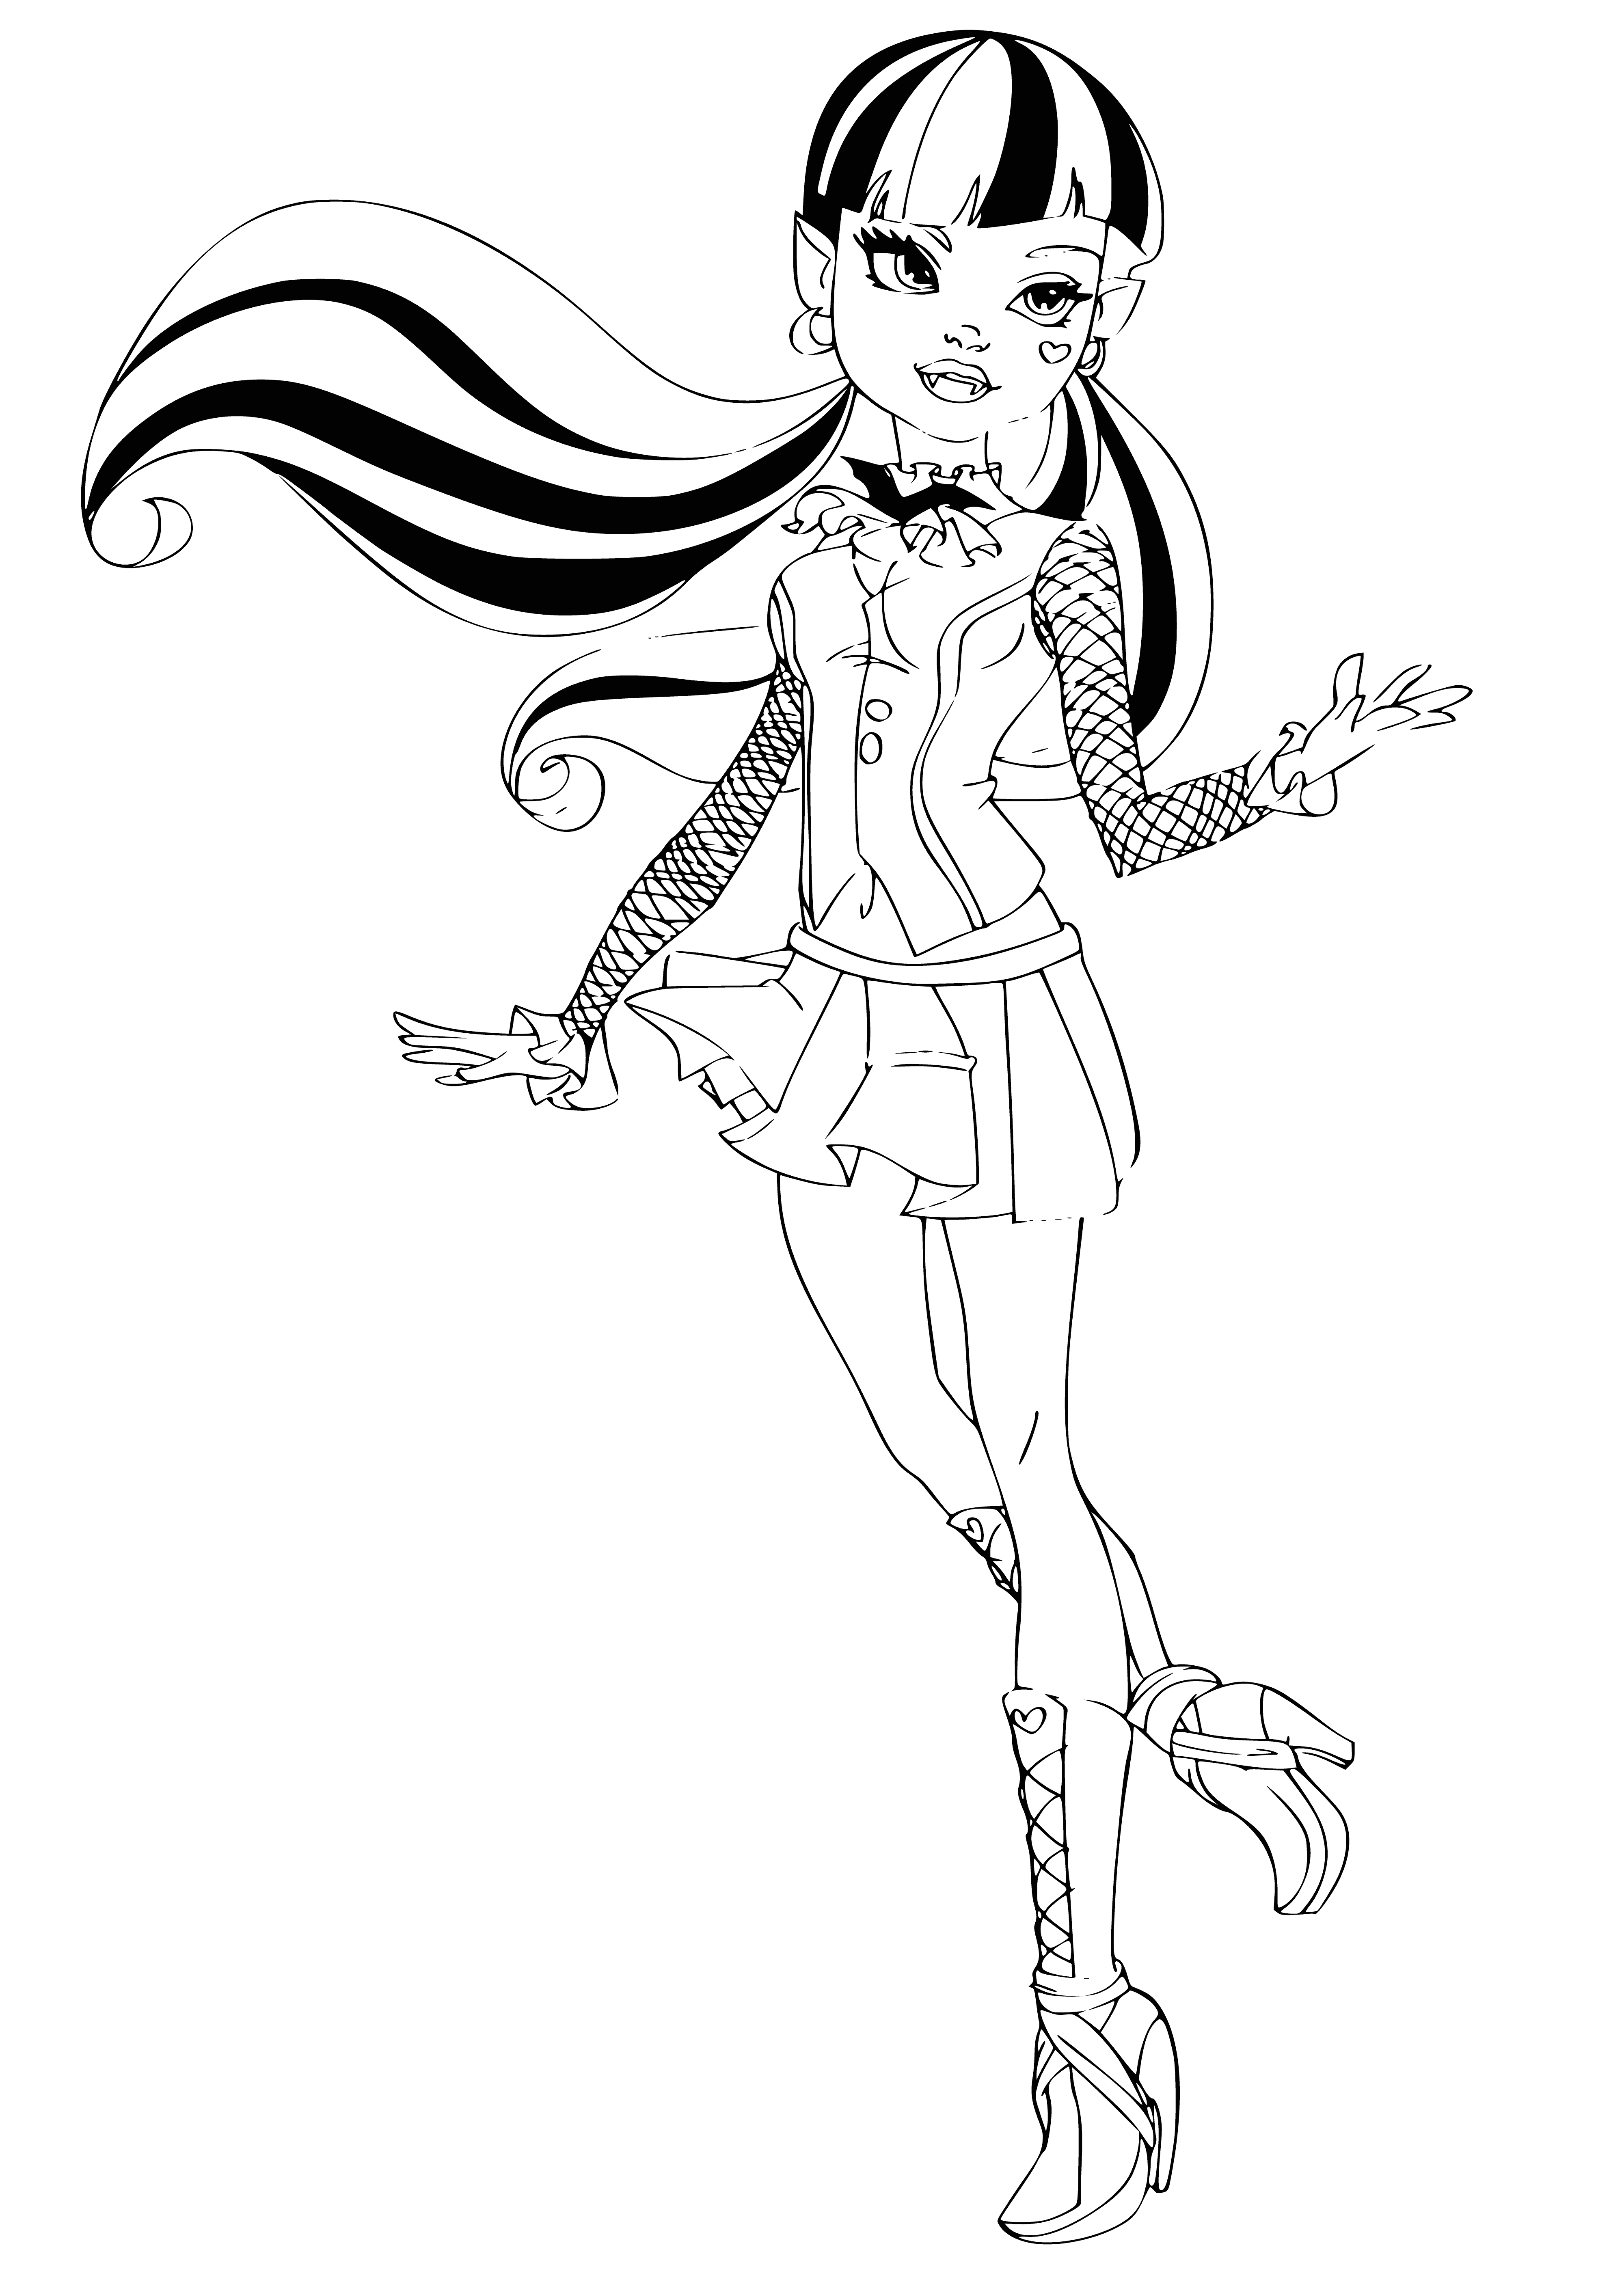 coloring page: Draculaura is a fashionable vampire who has a great sense of style & is always kind to everyone she meets.